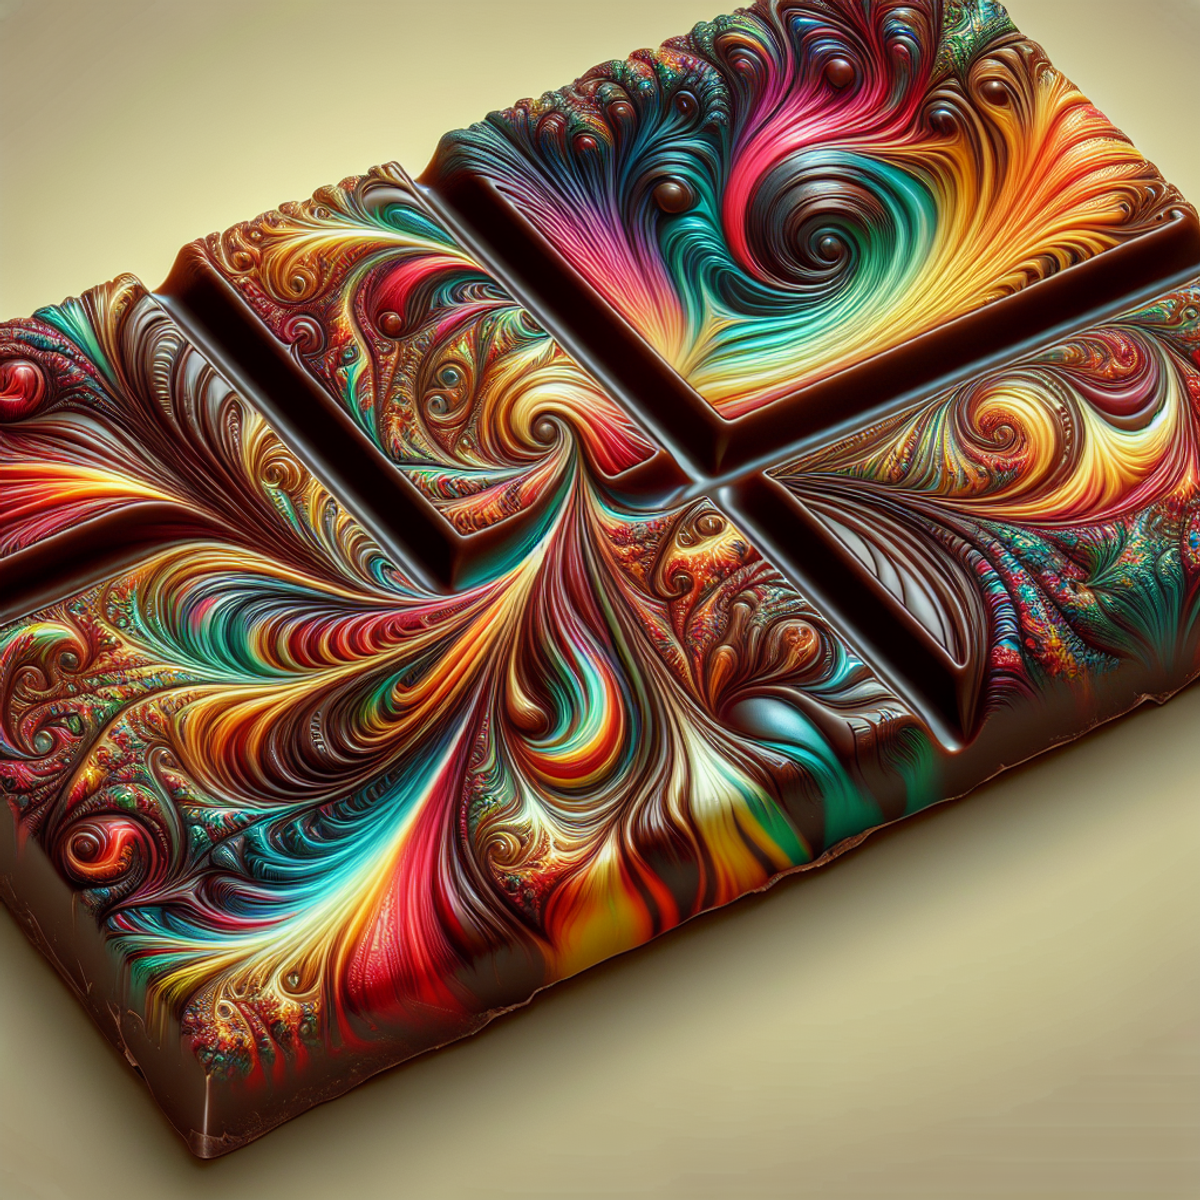 A colorful and dynamic psychedelic swirl pattern on a luxurious magic mushroom chocolate bar.